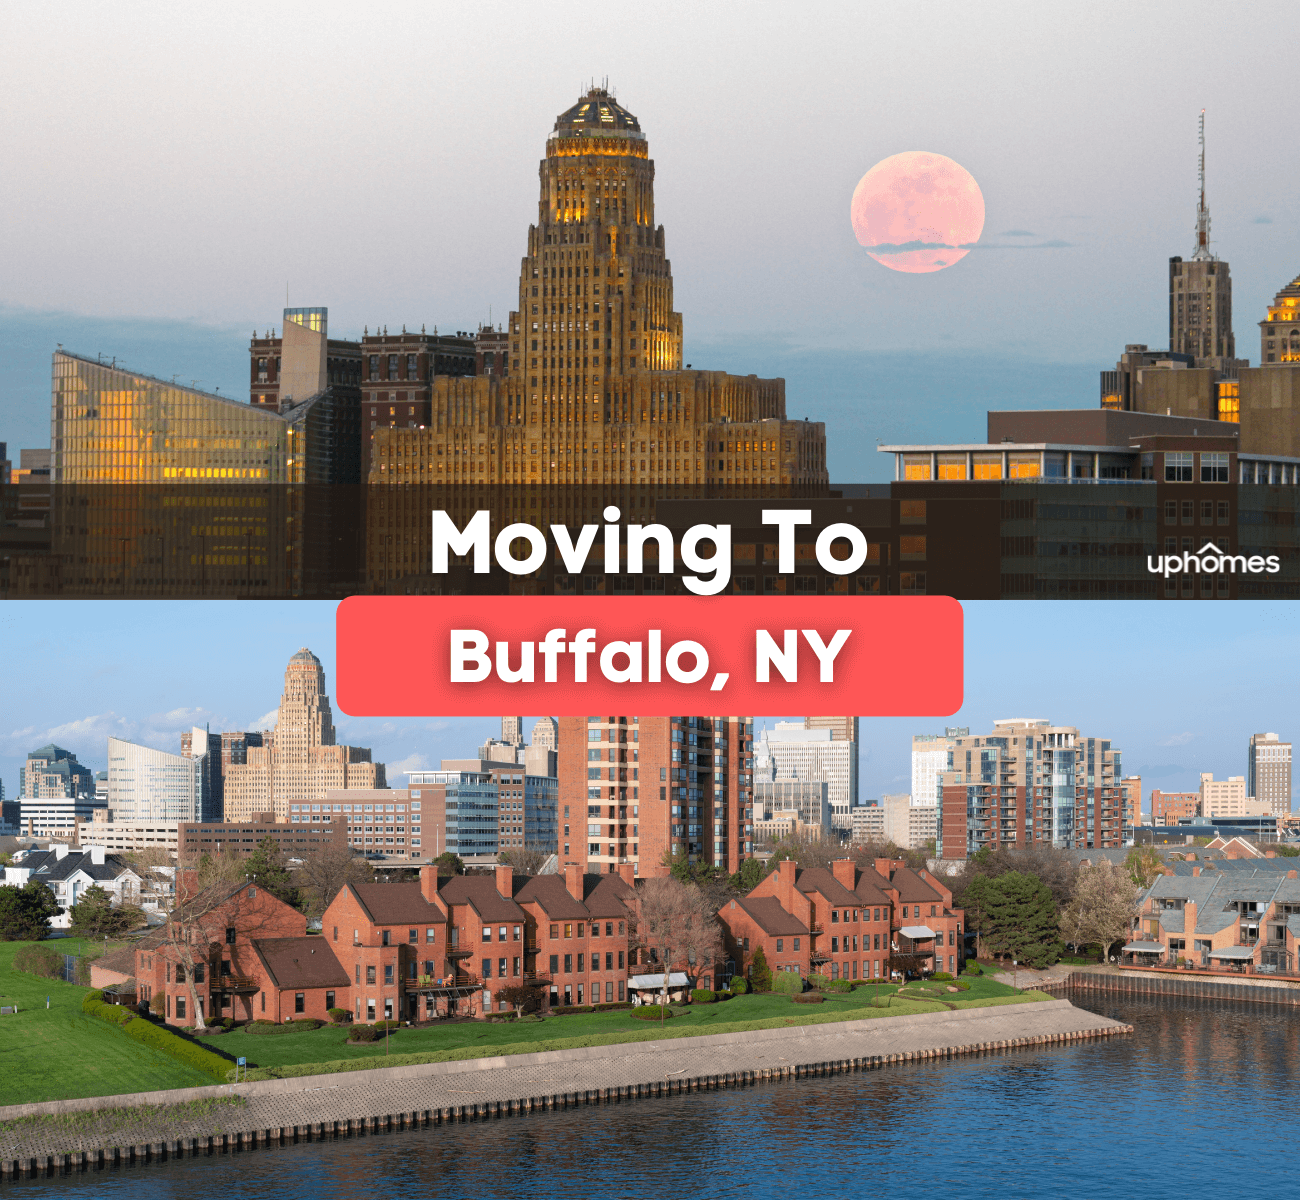 Moving to Buffalo, NY - What is it like living in Buffalo New York?